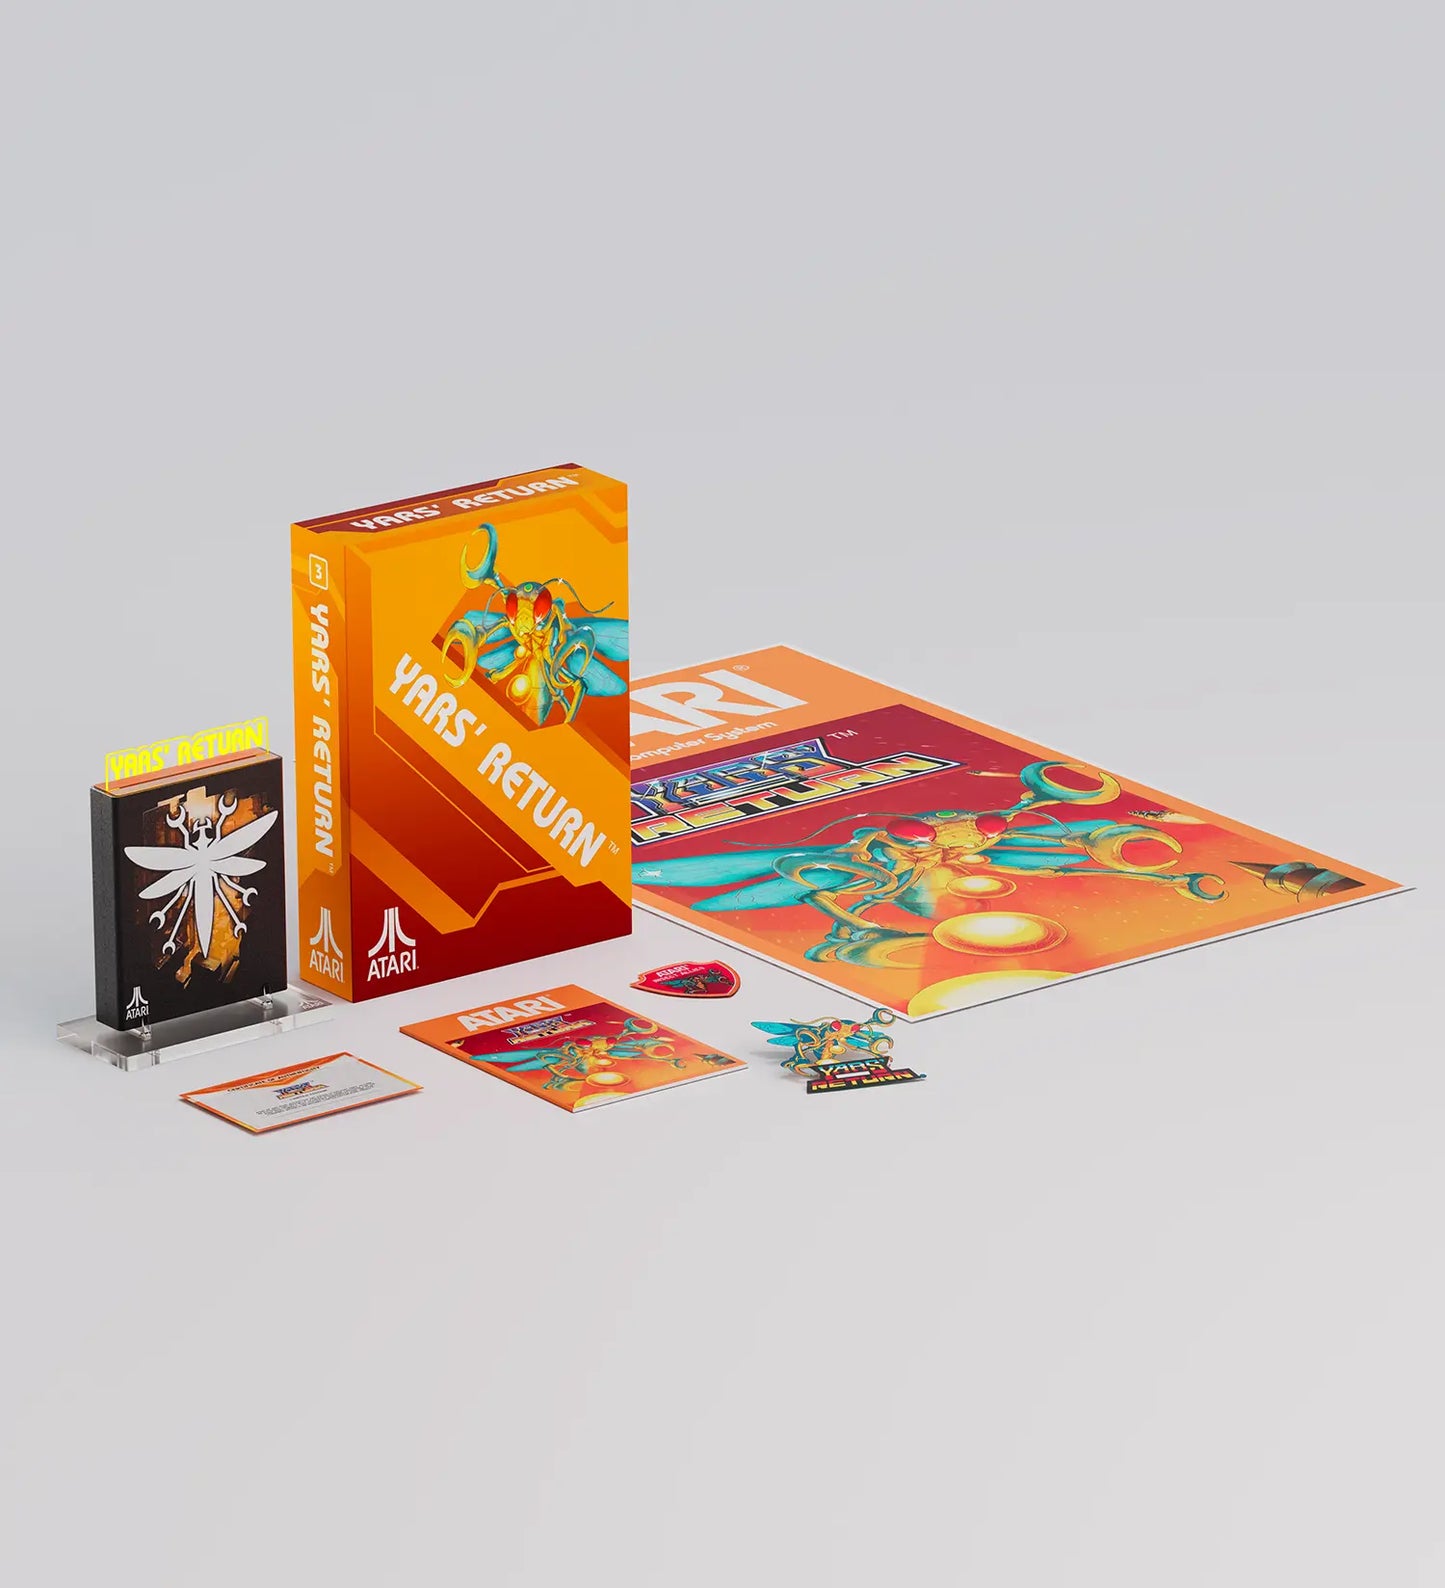 Limited Edition 3-Game Atari XP Cartridge Set of Unreleased Games